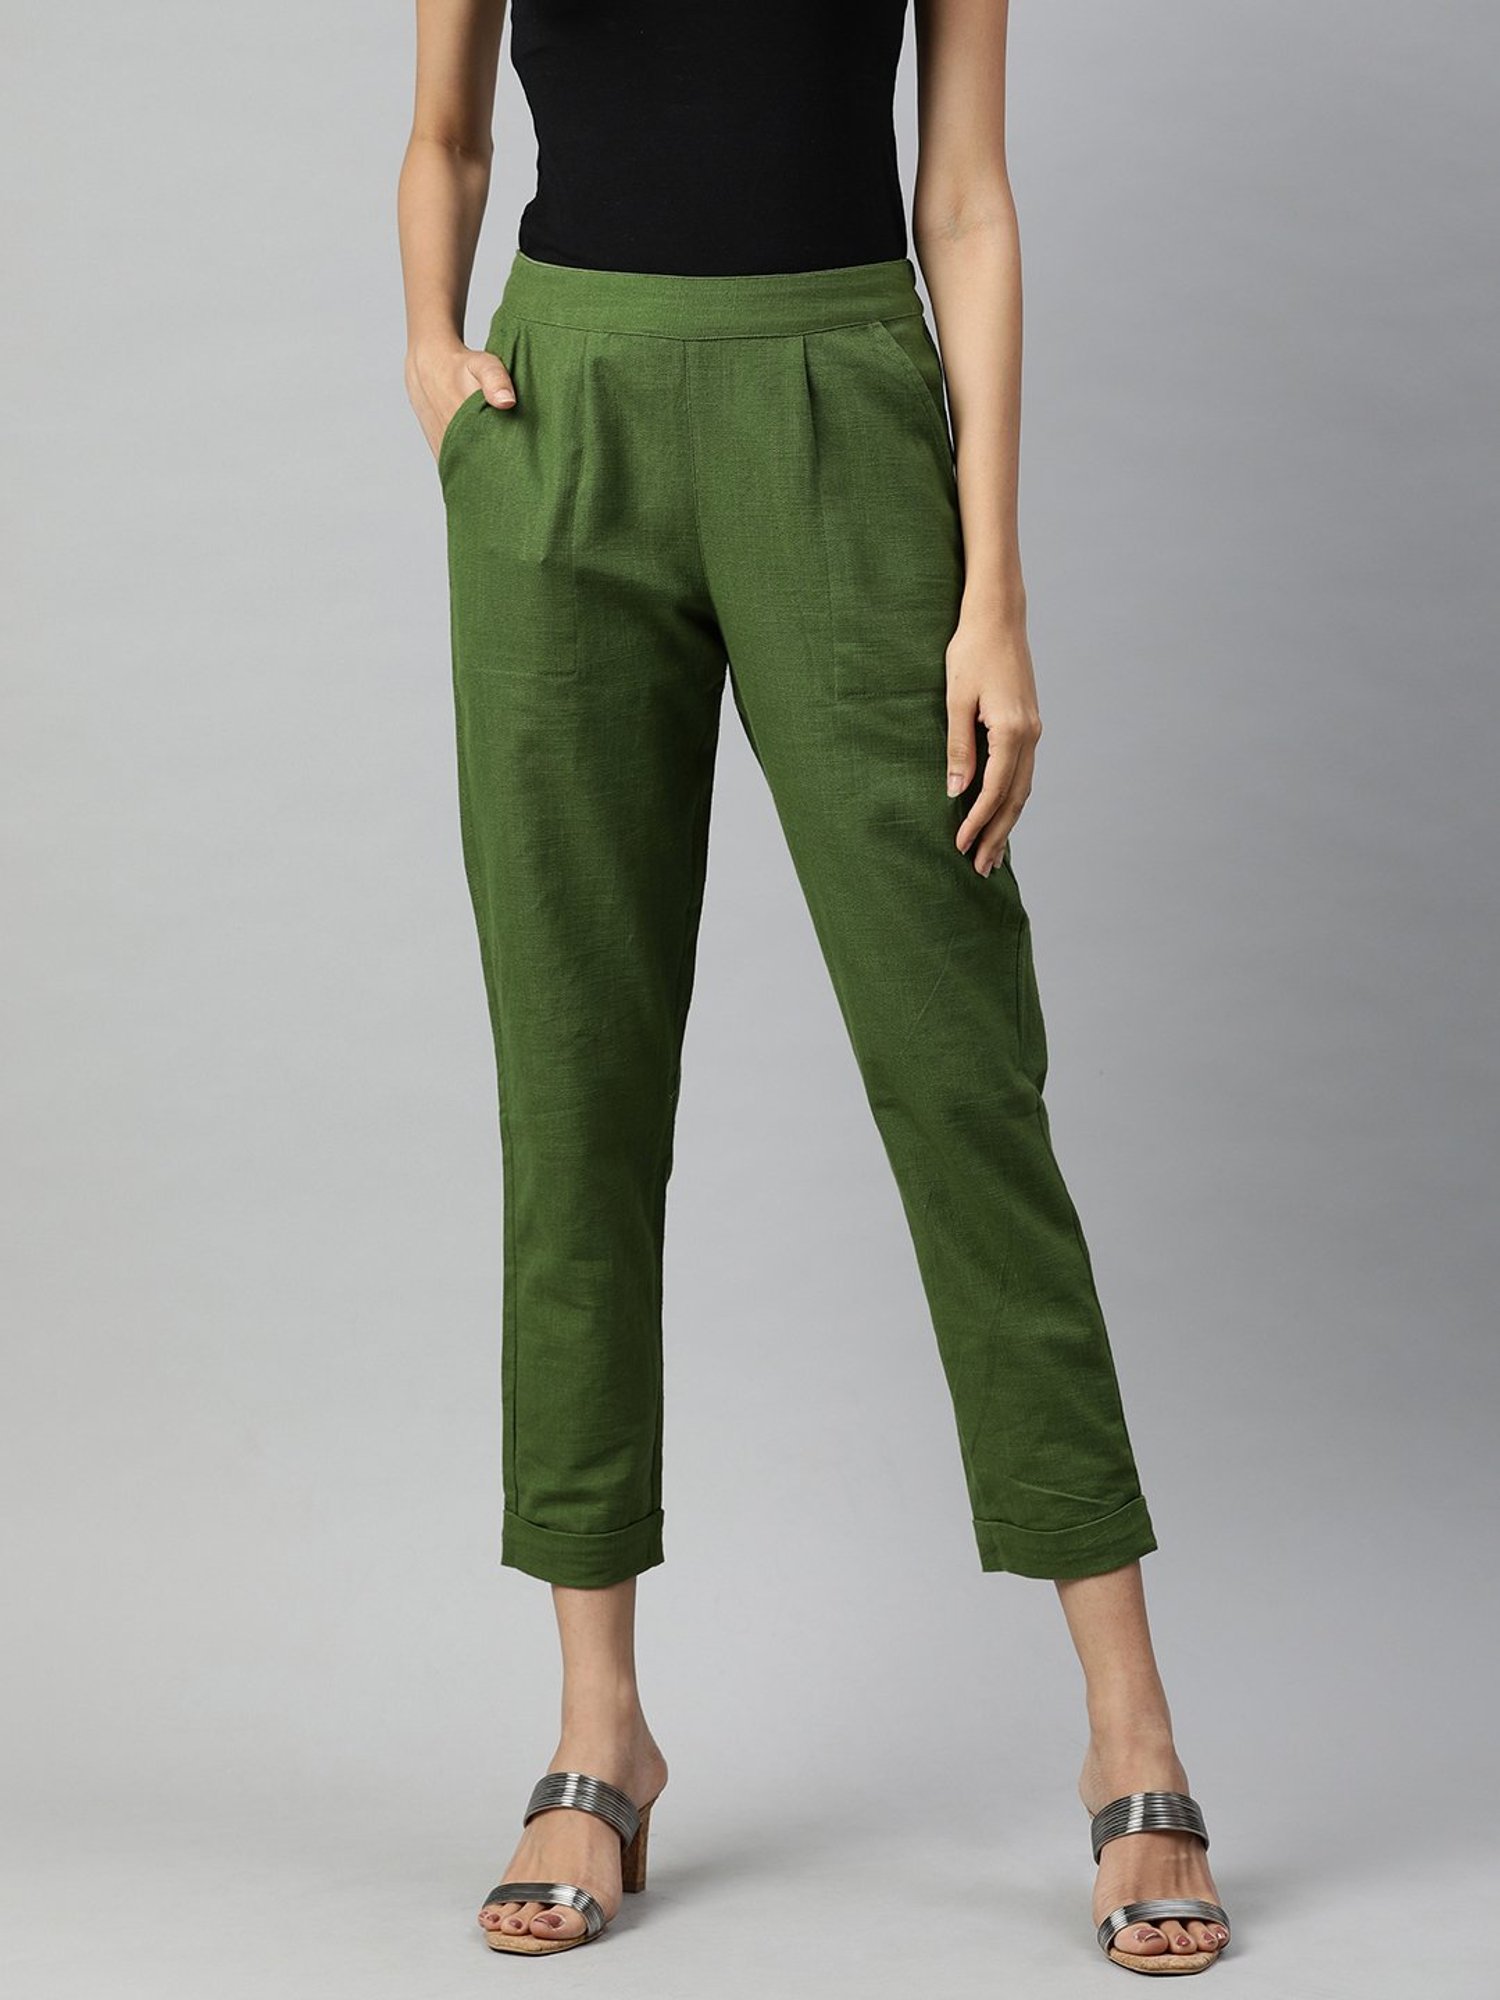 outfit ideas for women | Green pants outfit, Casual outfits, Olive green  pants outfit